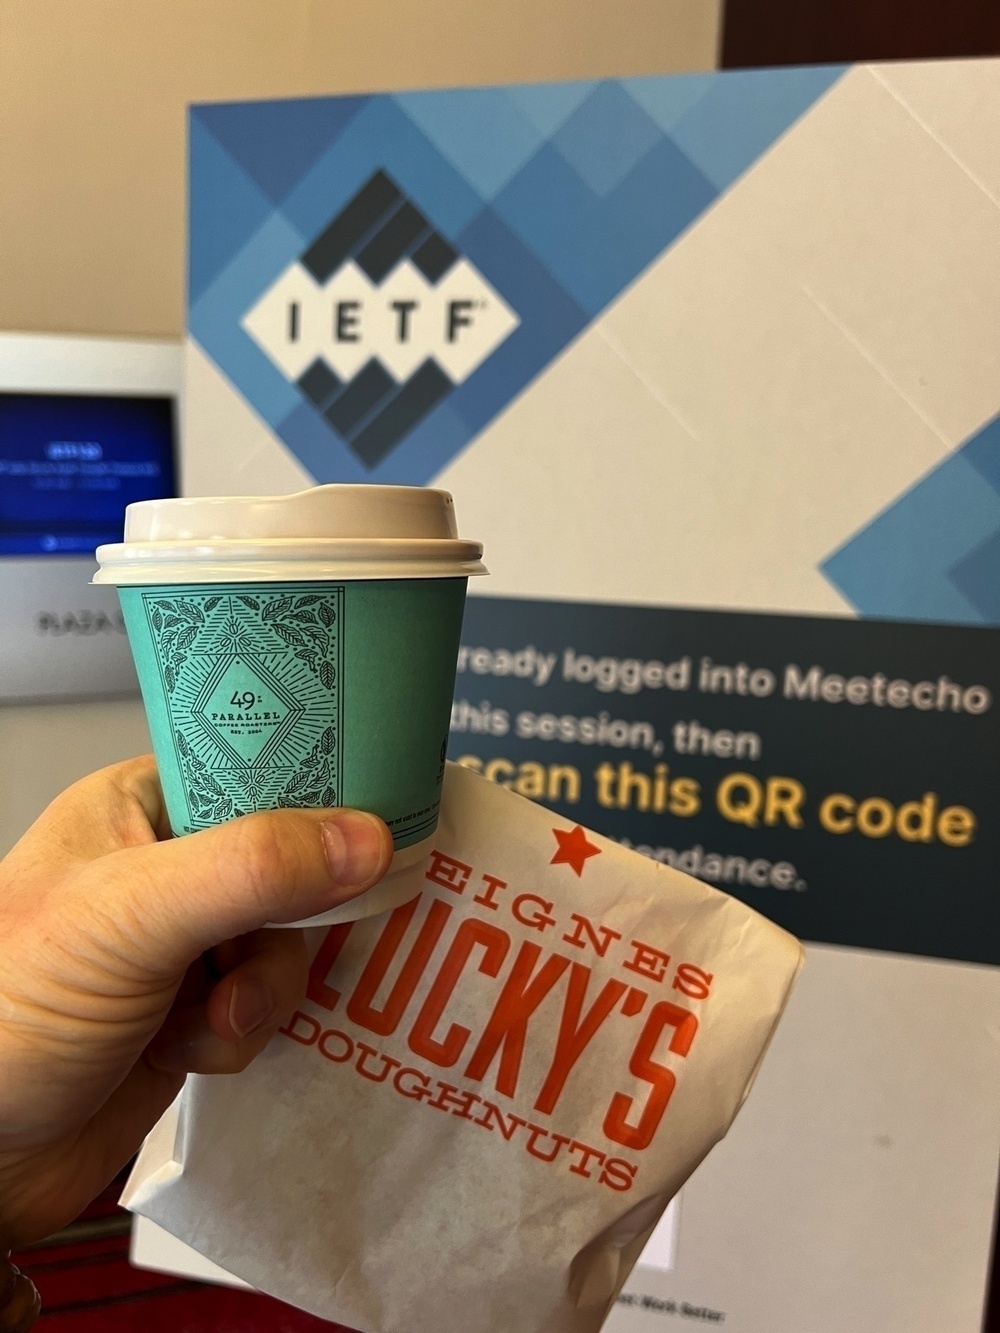 Chad holds a Parallel 49 coffee and bag of Lucky’s donuts in front of an IETF meeting sign